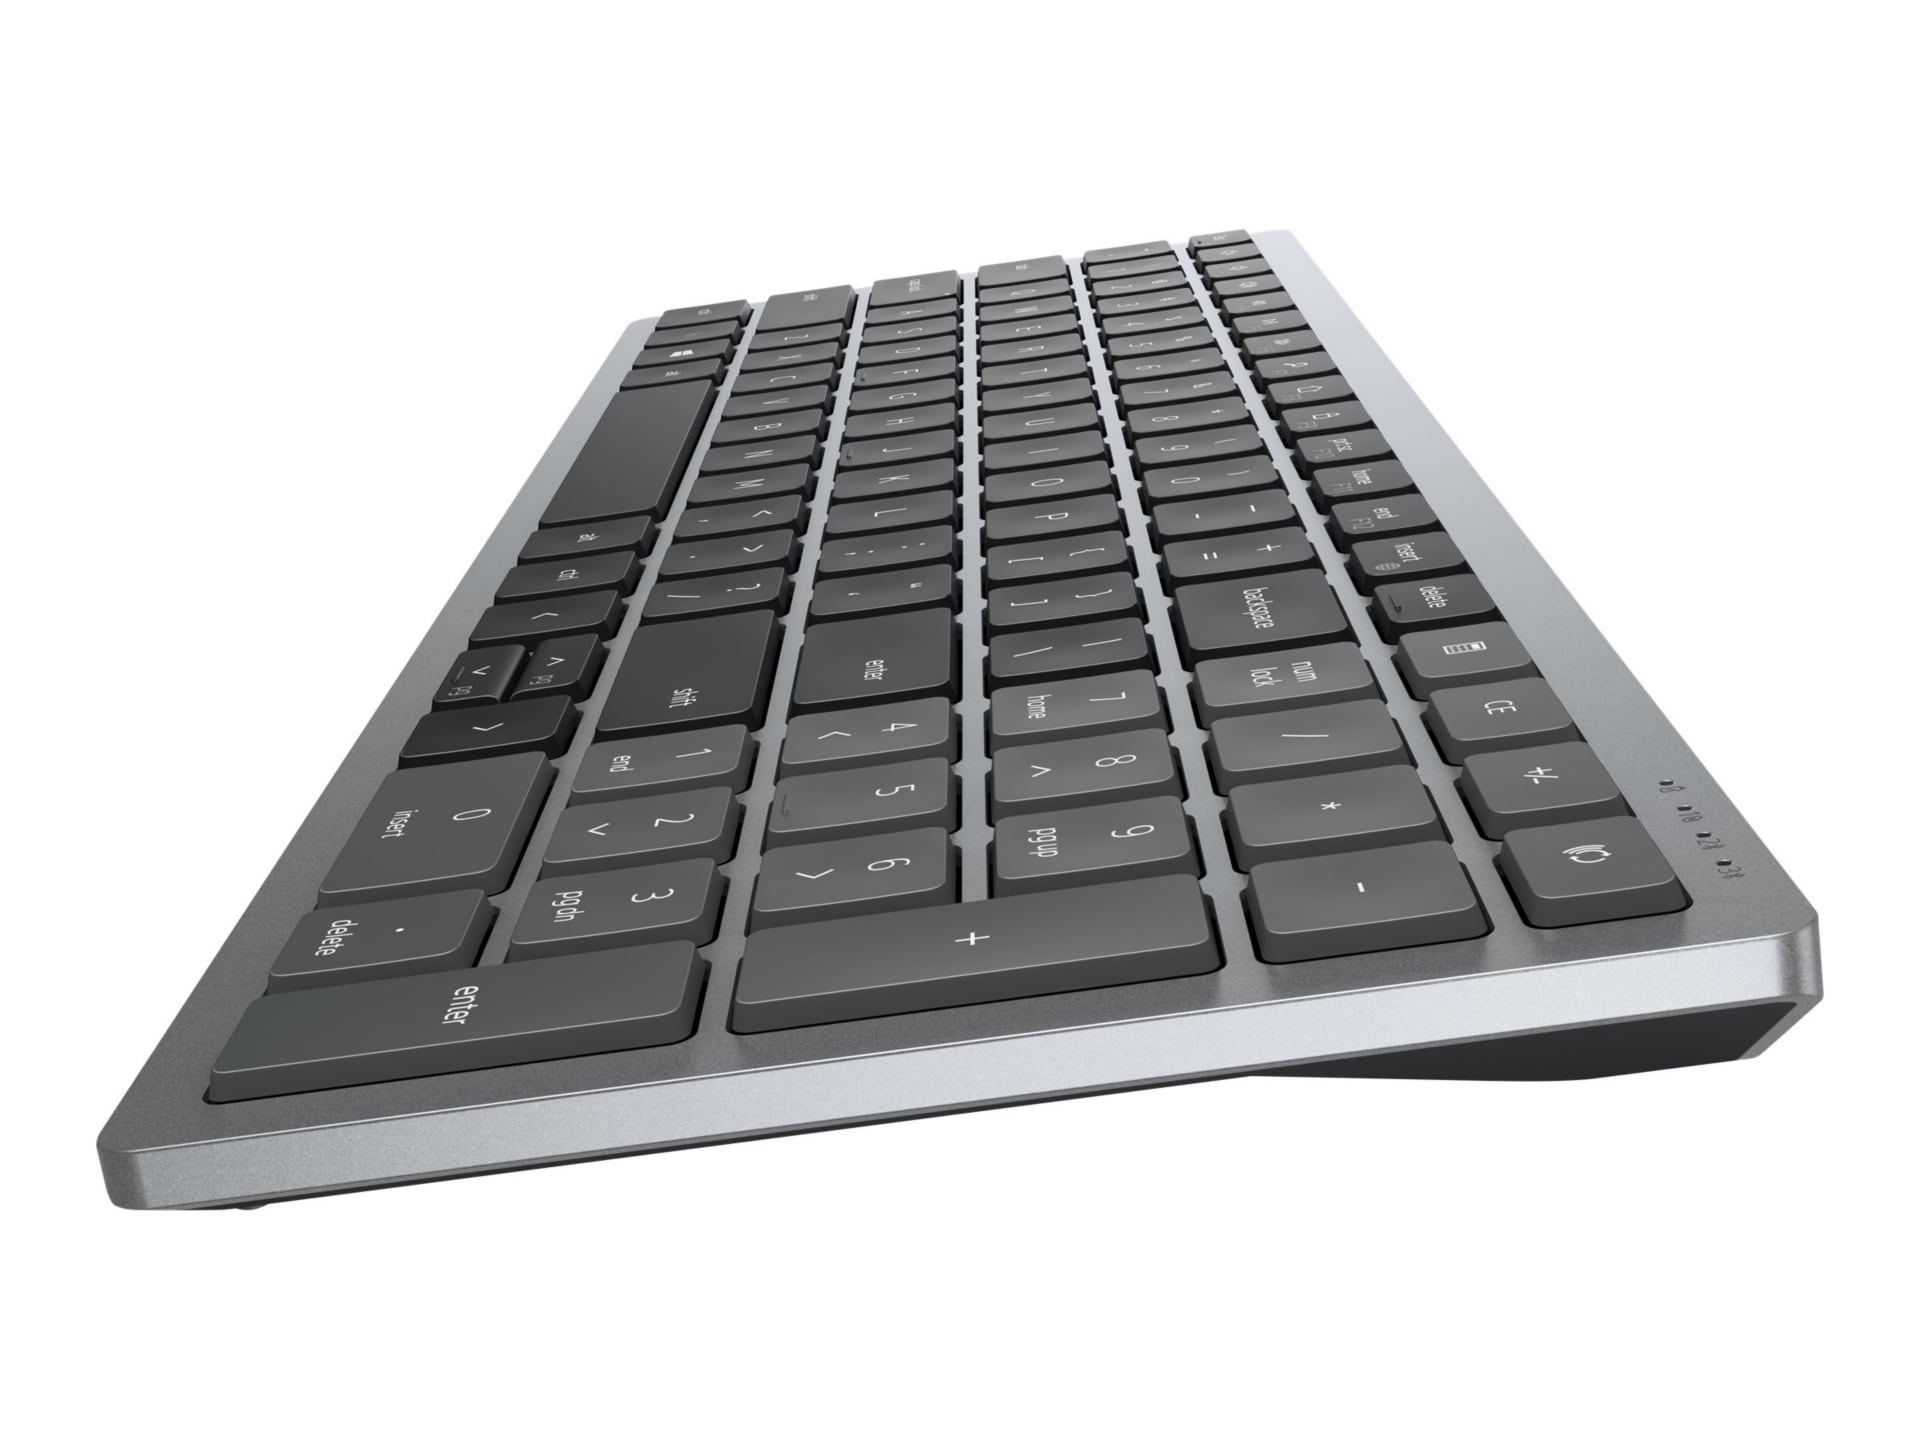 Dell KM7120W Multi-Device Wireless Keyboard and Mouse Combo - Titan Gray